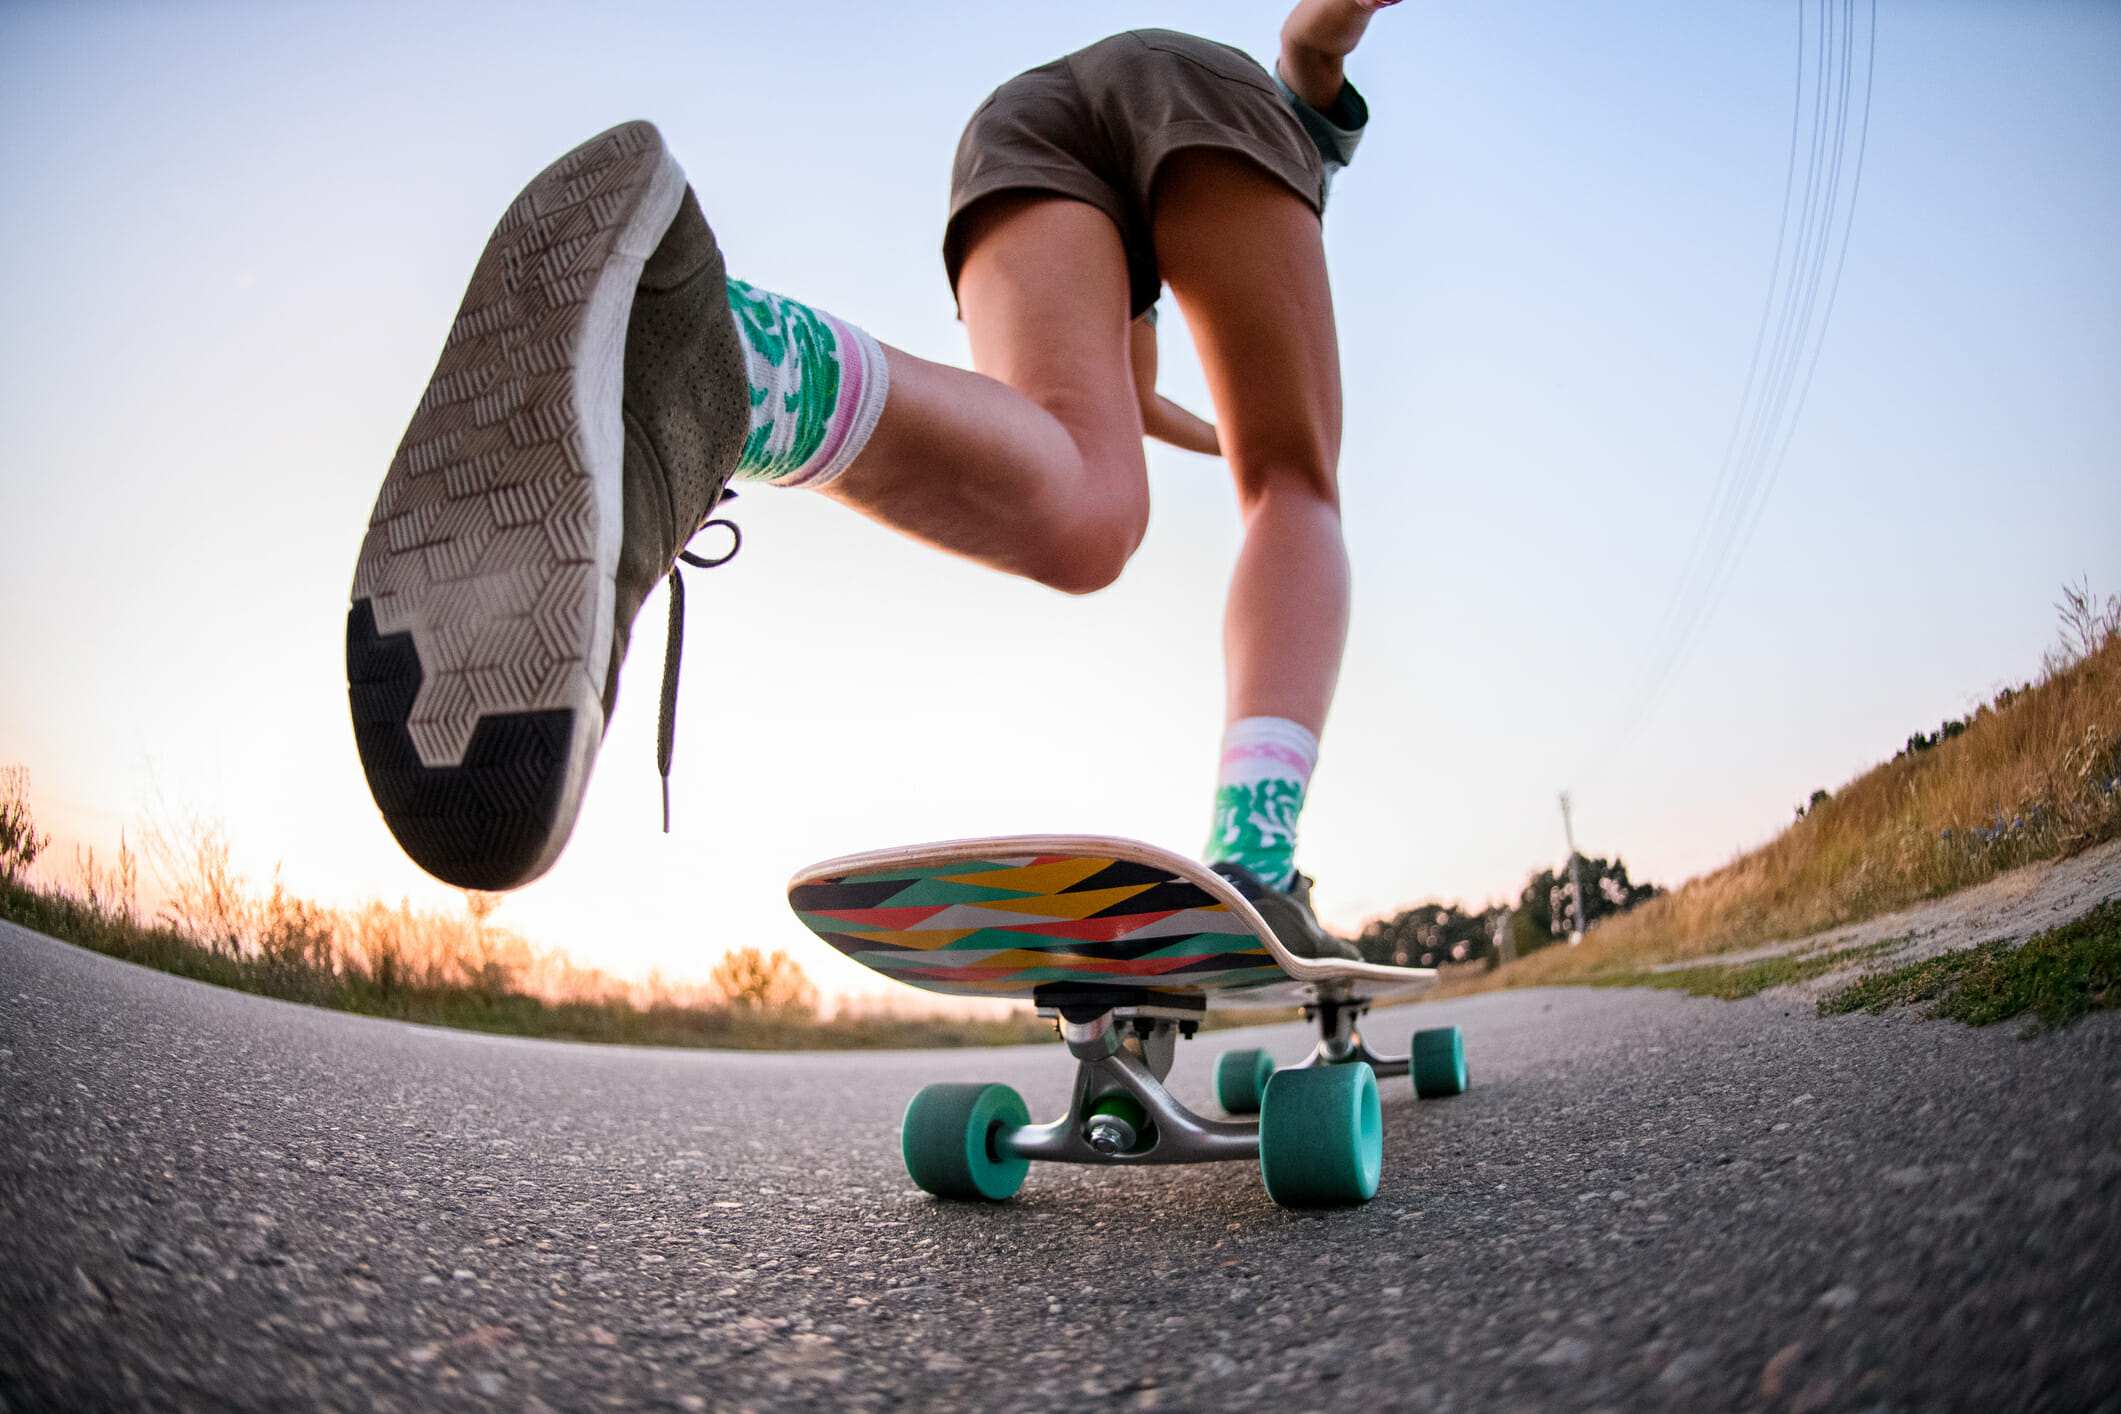 low angle view of girl who is riding on skateboard on the asphalt. Close-up of girl's legs